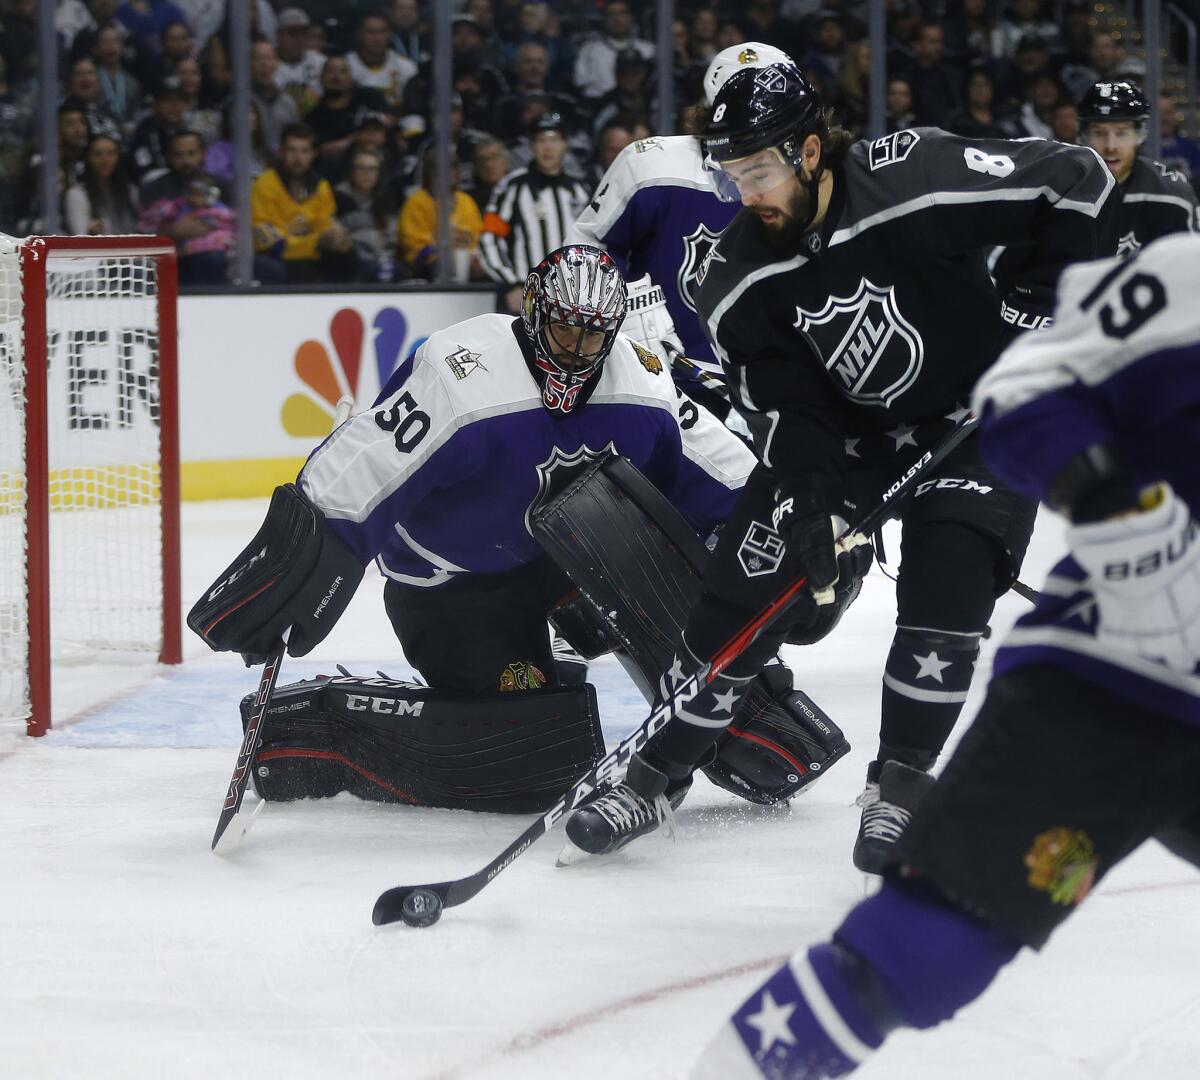 Kings defenseman Drew Doughty (8) tries to score against Chicago Blackhawks goalie Corey Crawford during the NHL All-Star game at Staples Center.